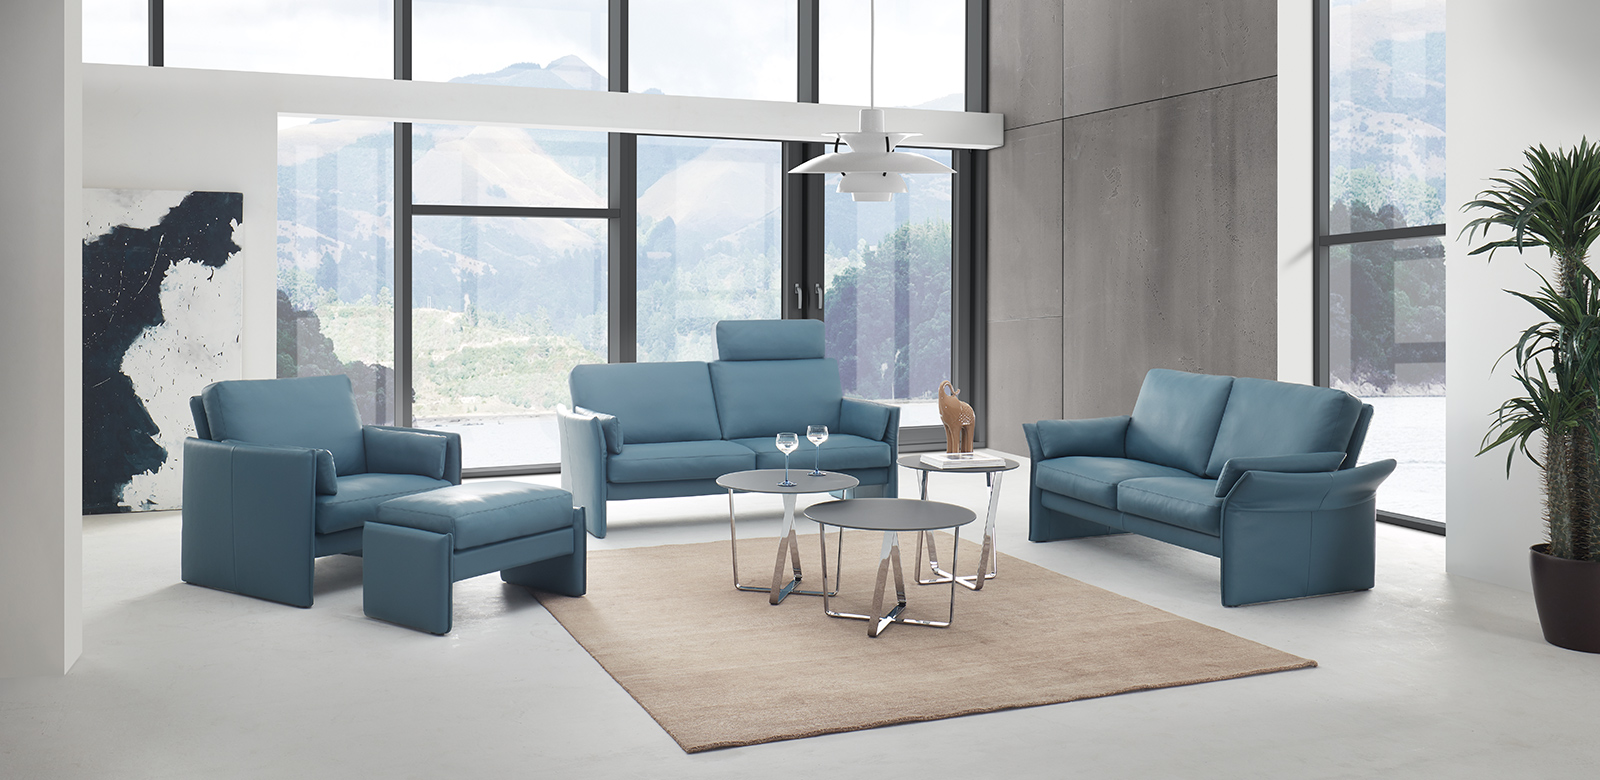 Sevilla seating group consisting of two sofas with headboard, folding armrests and armchair with stool in grey-blue leather in modern, cubist villa.